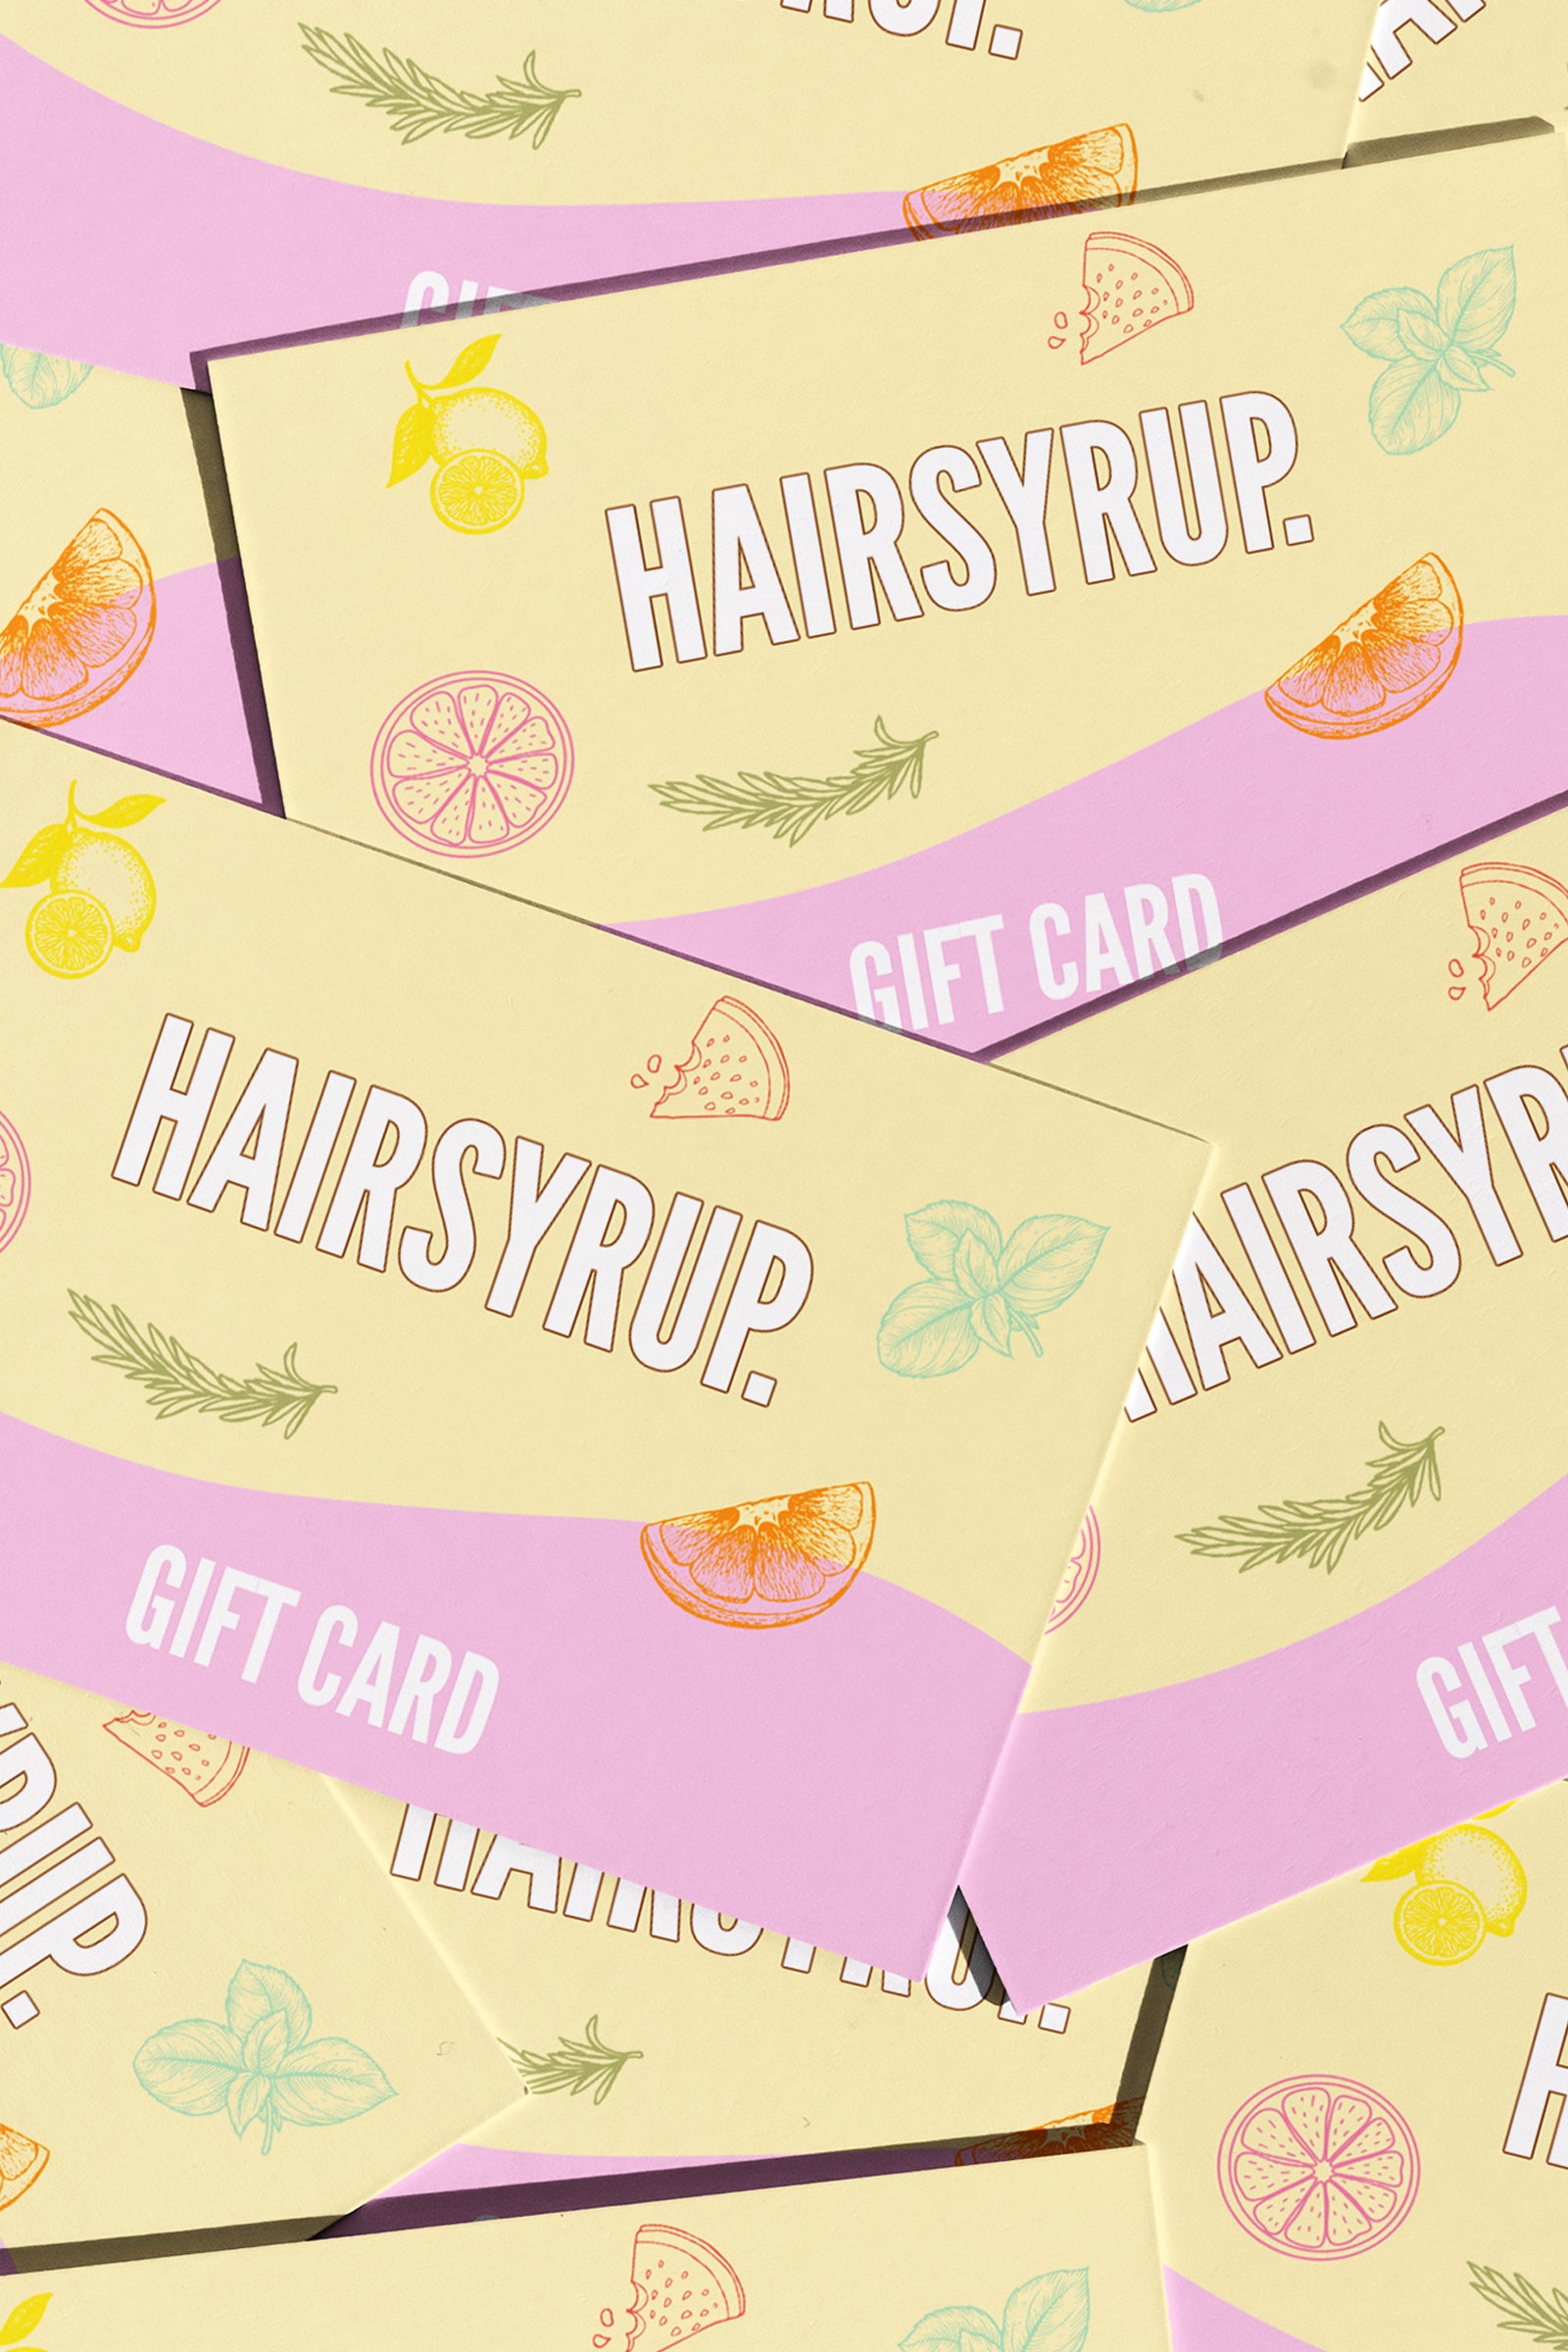 Hair Syrup Gift Card 🍯 Please only add a gift card to your basket no other prodcuts thank you. ❤️